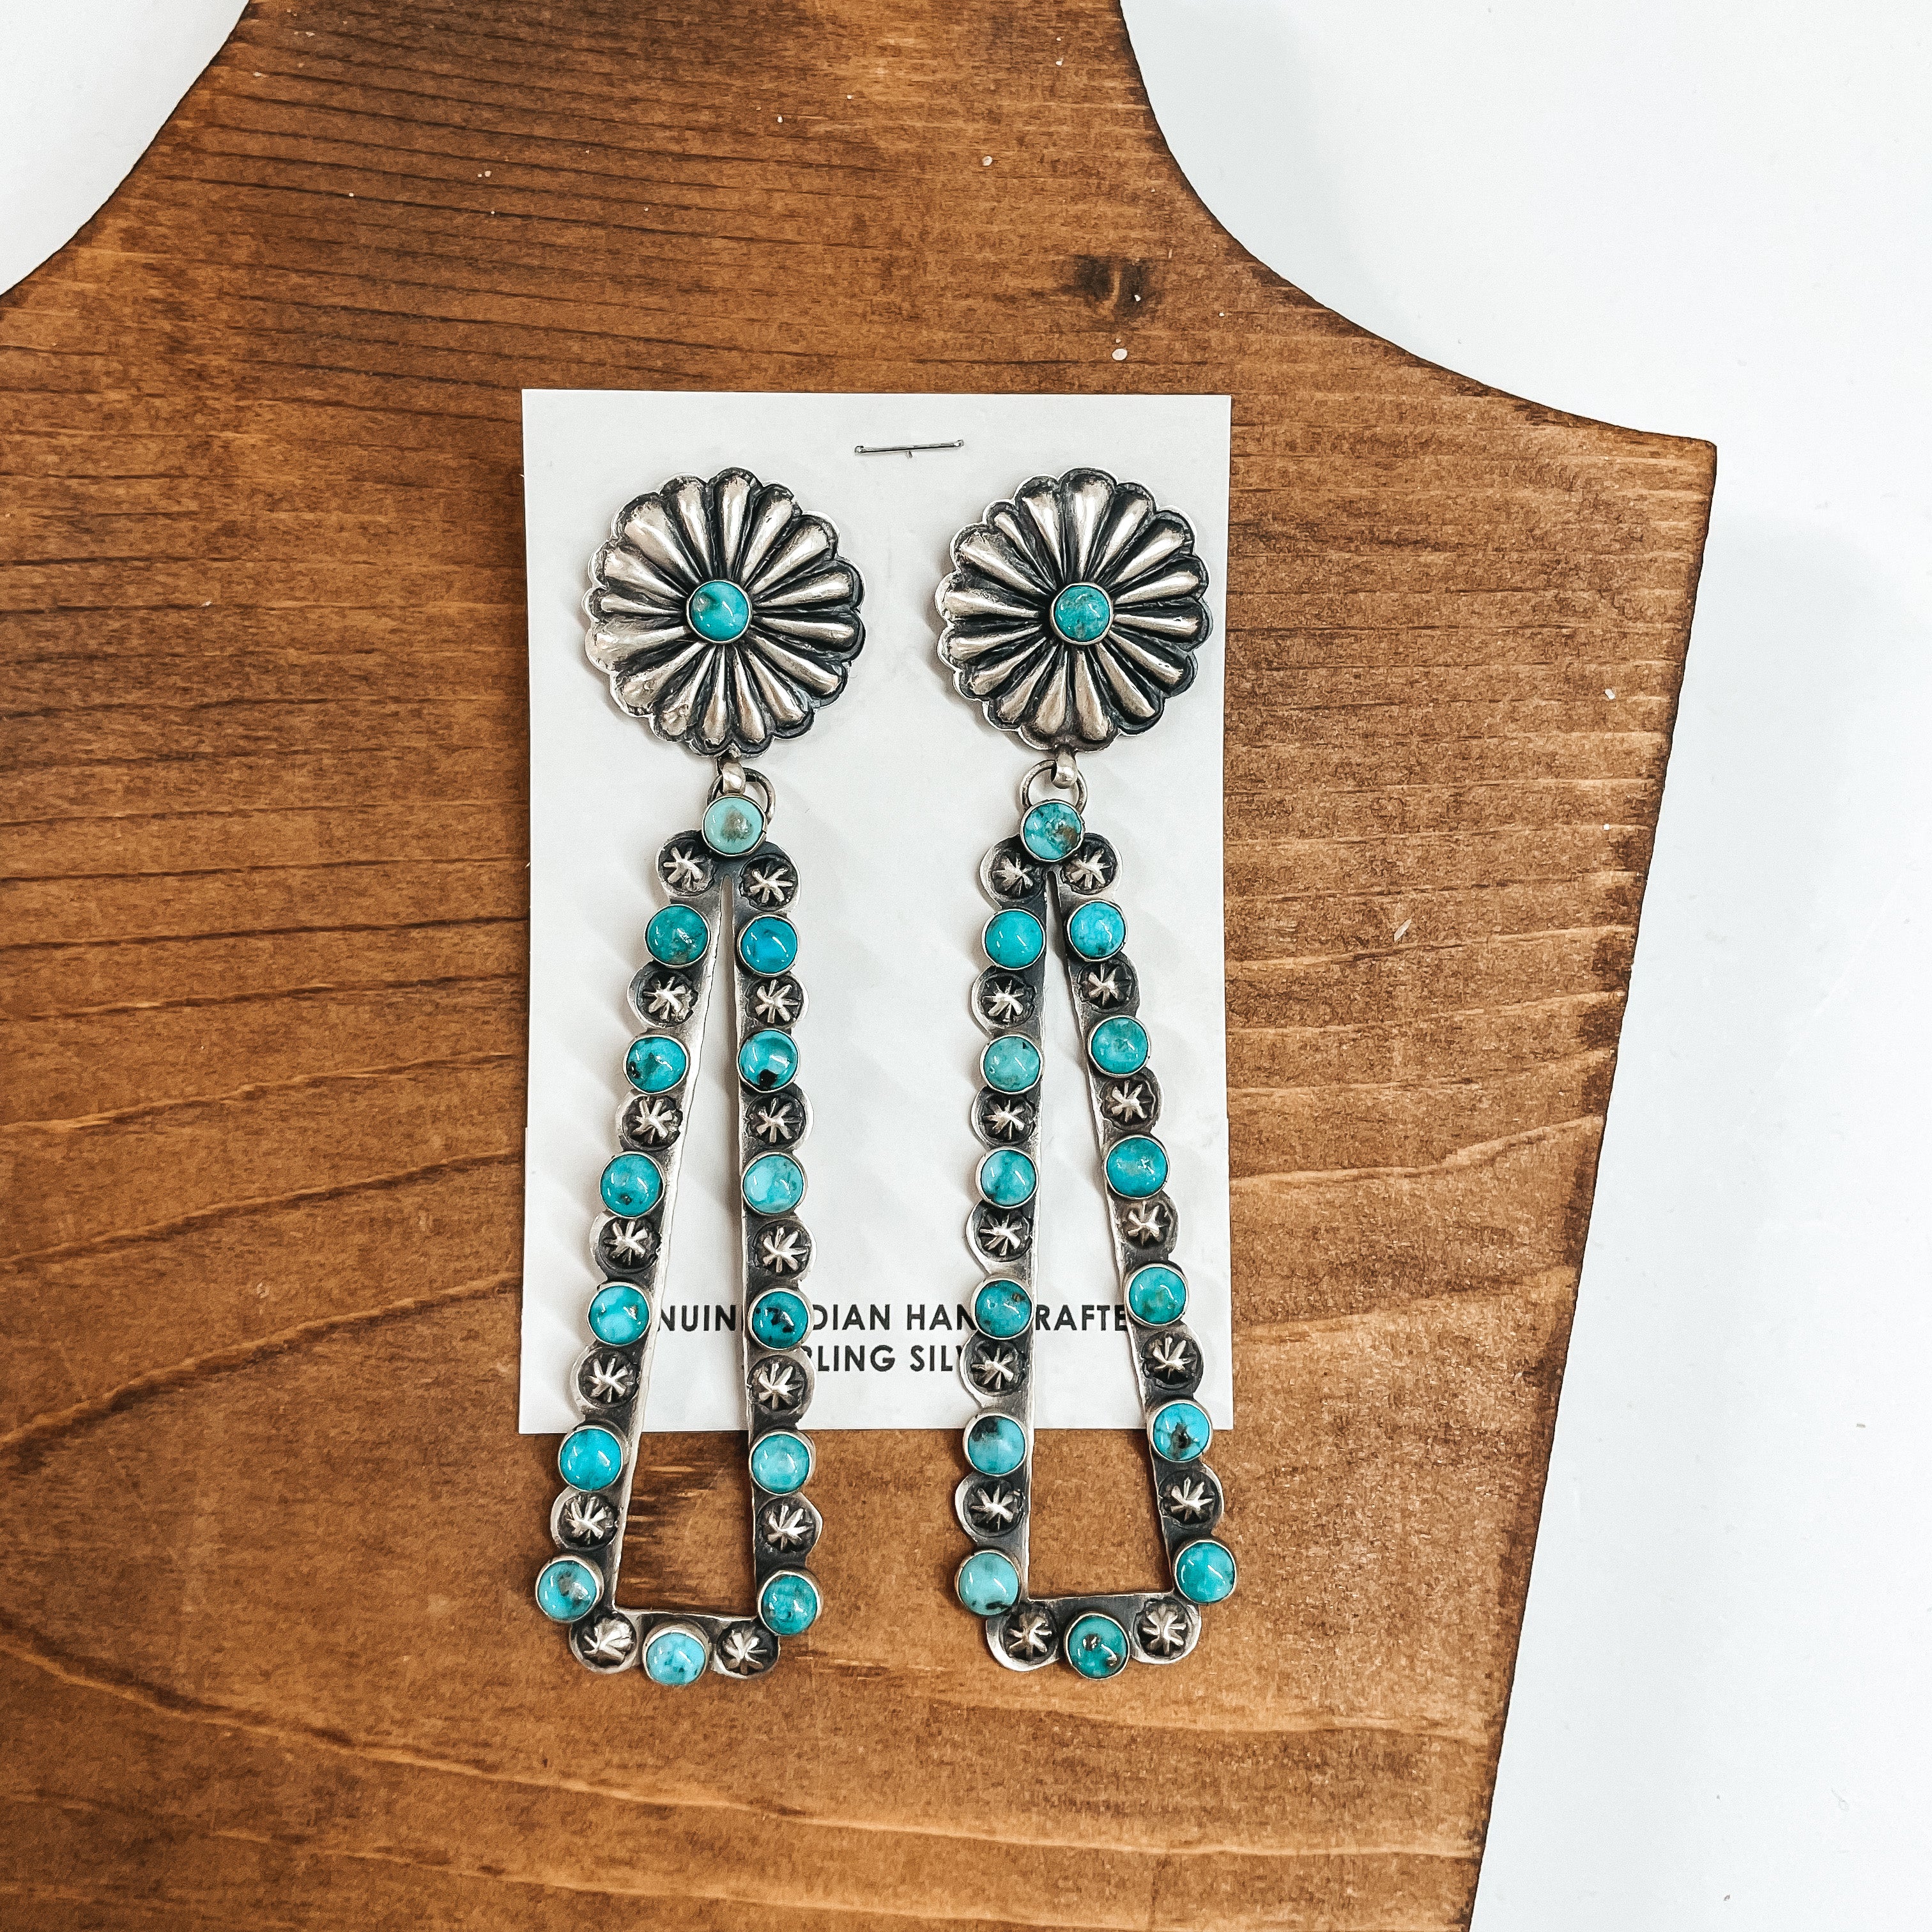 Eugene Charley | Navajo Handmade Sterling Silver Concho Post Earrings with Teardrop Outline Dangle with Turquoise Stones - Giddy Up Glamour Boutique